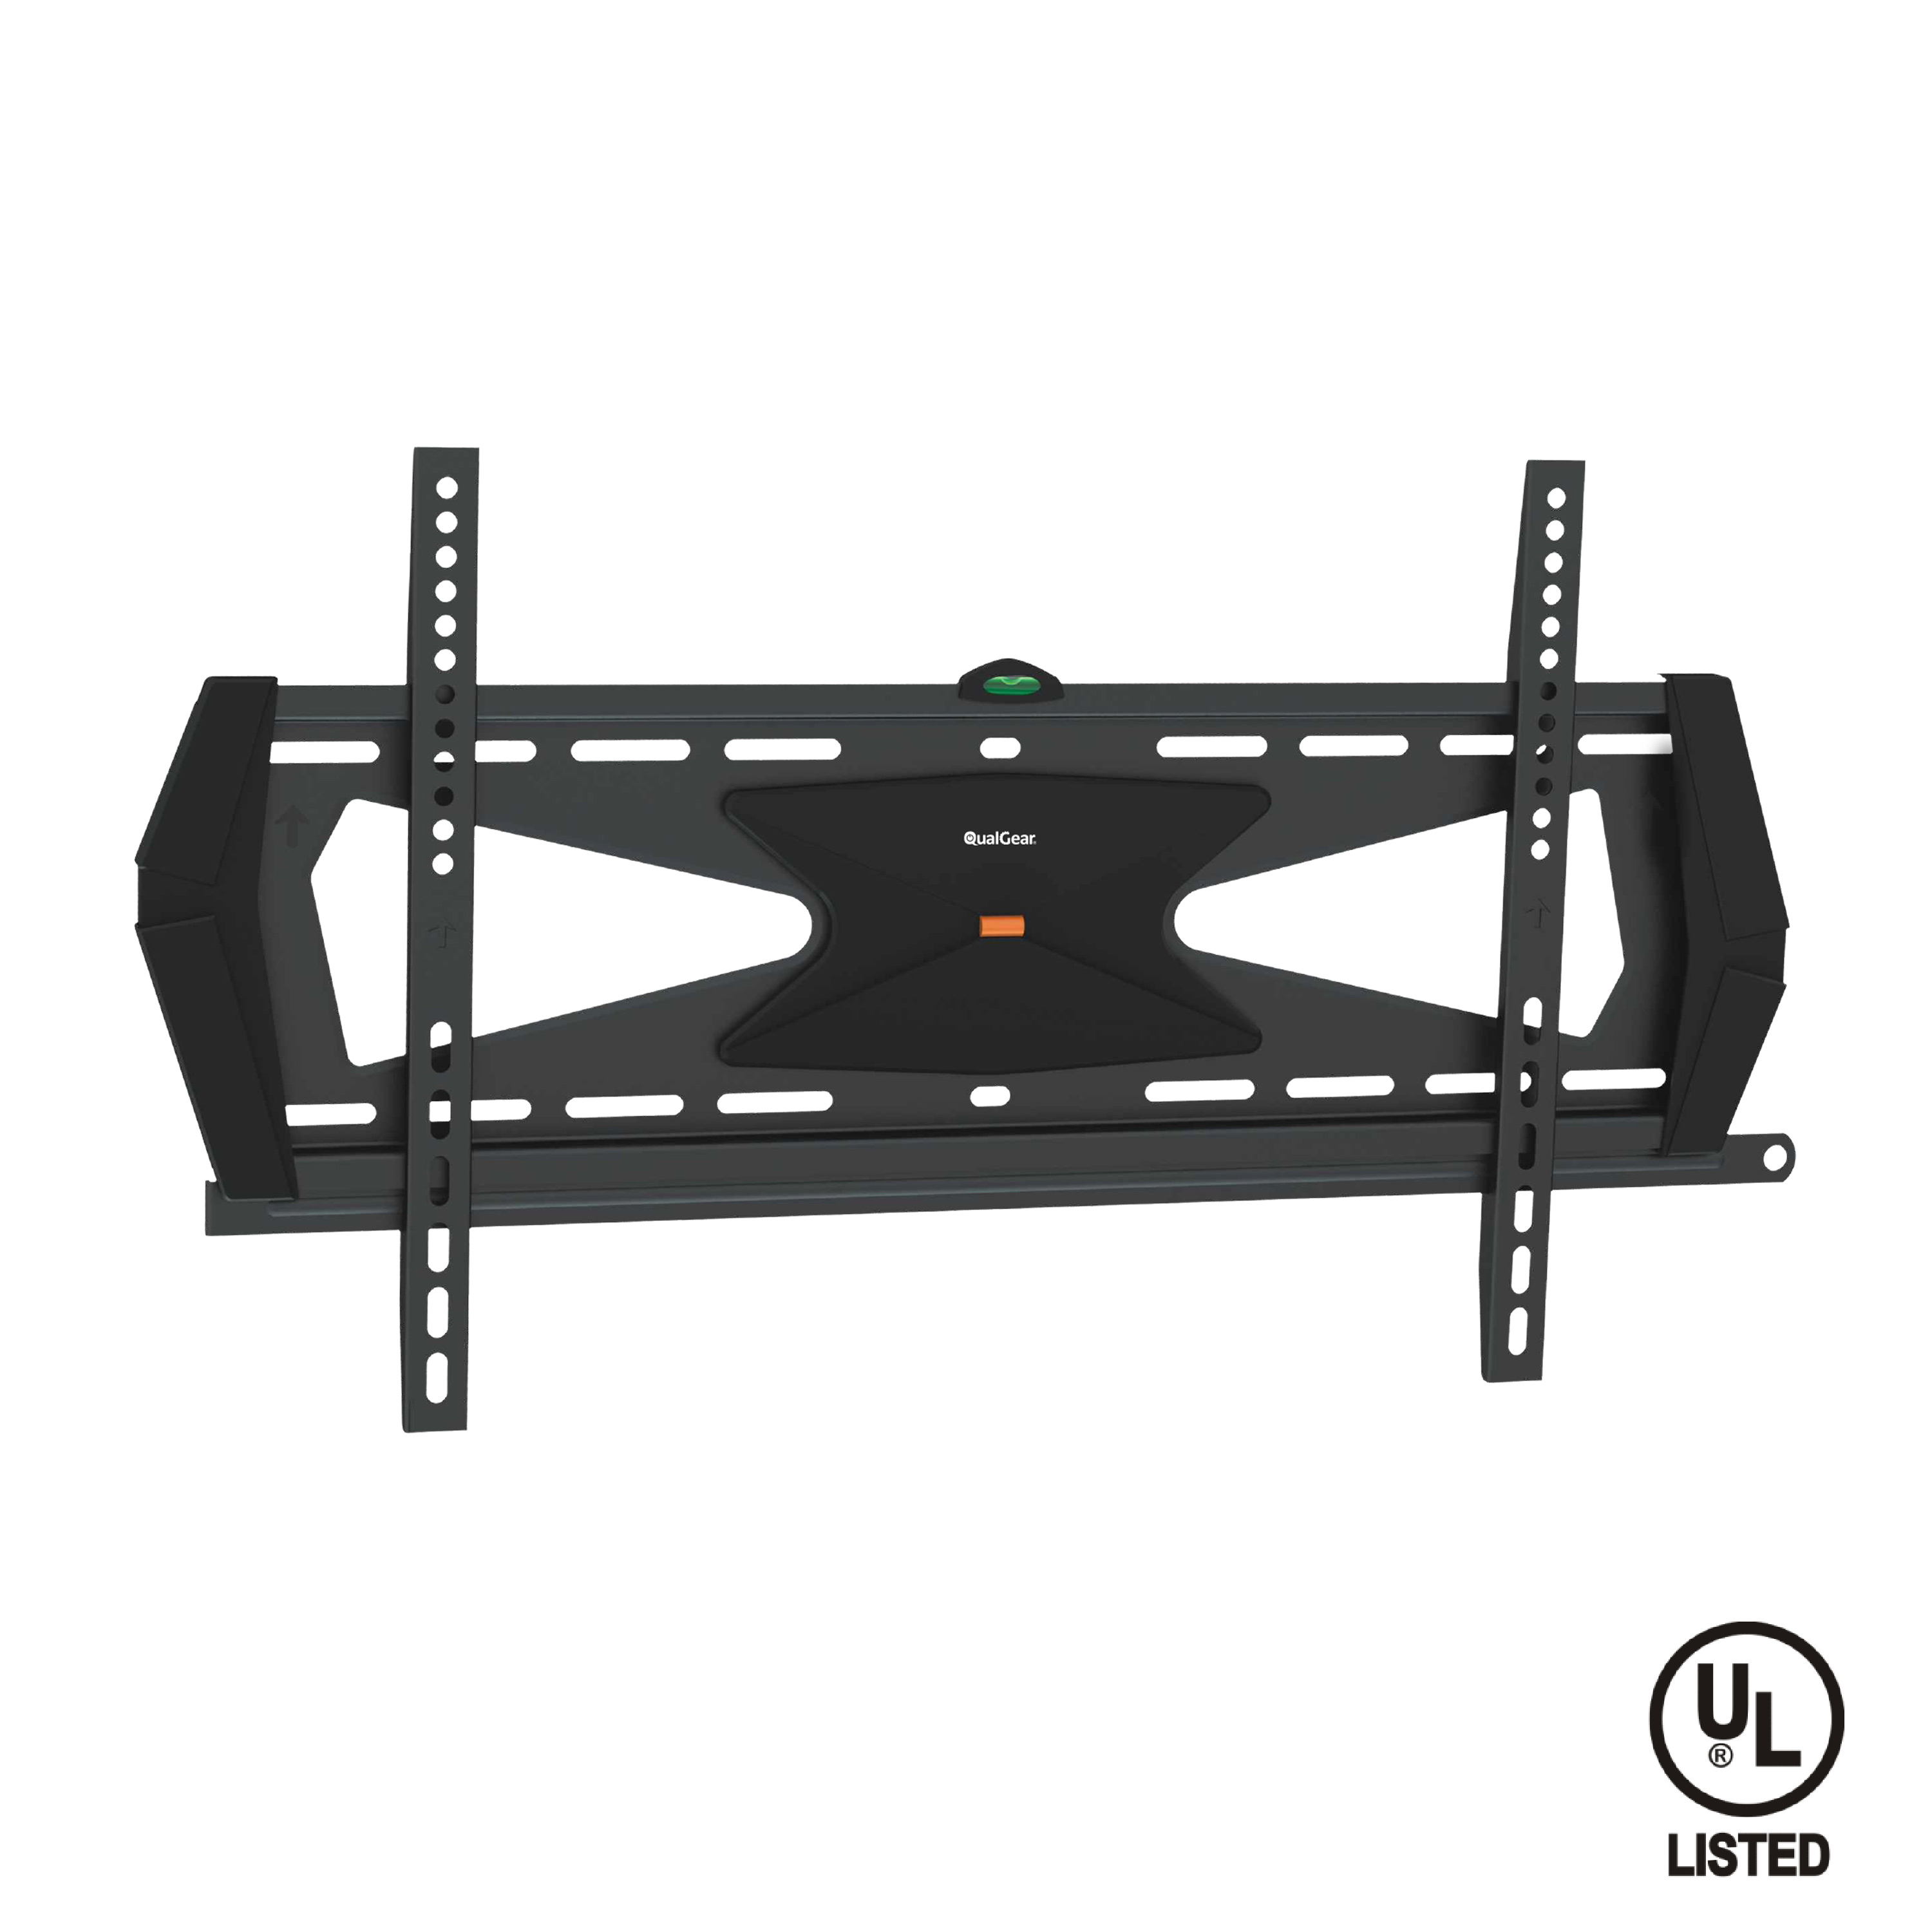 QualGear Heavy Duty Fixed TV Wall Mount for 37 to 70 Inch Flat Panel and Curved TVs, Black (QG-TM-030-BLK) [UL Listed]